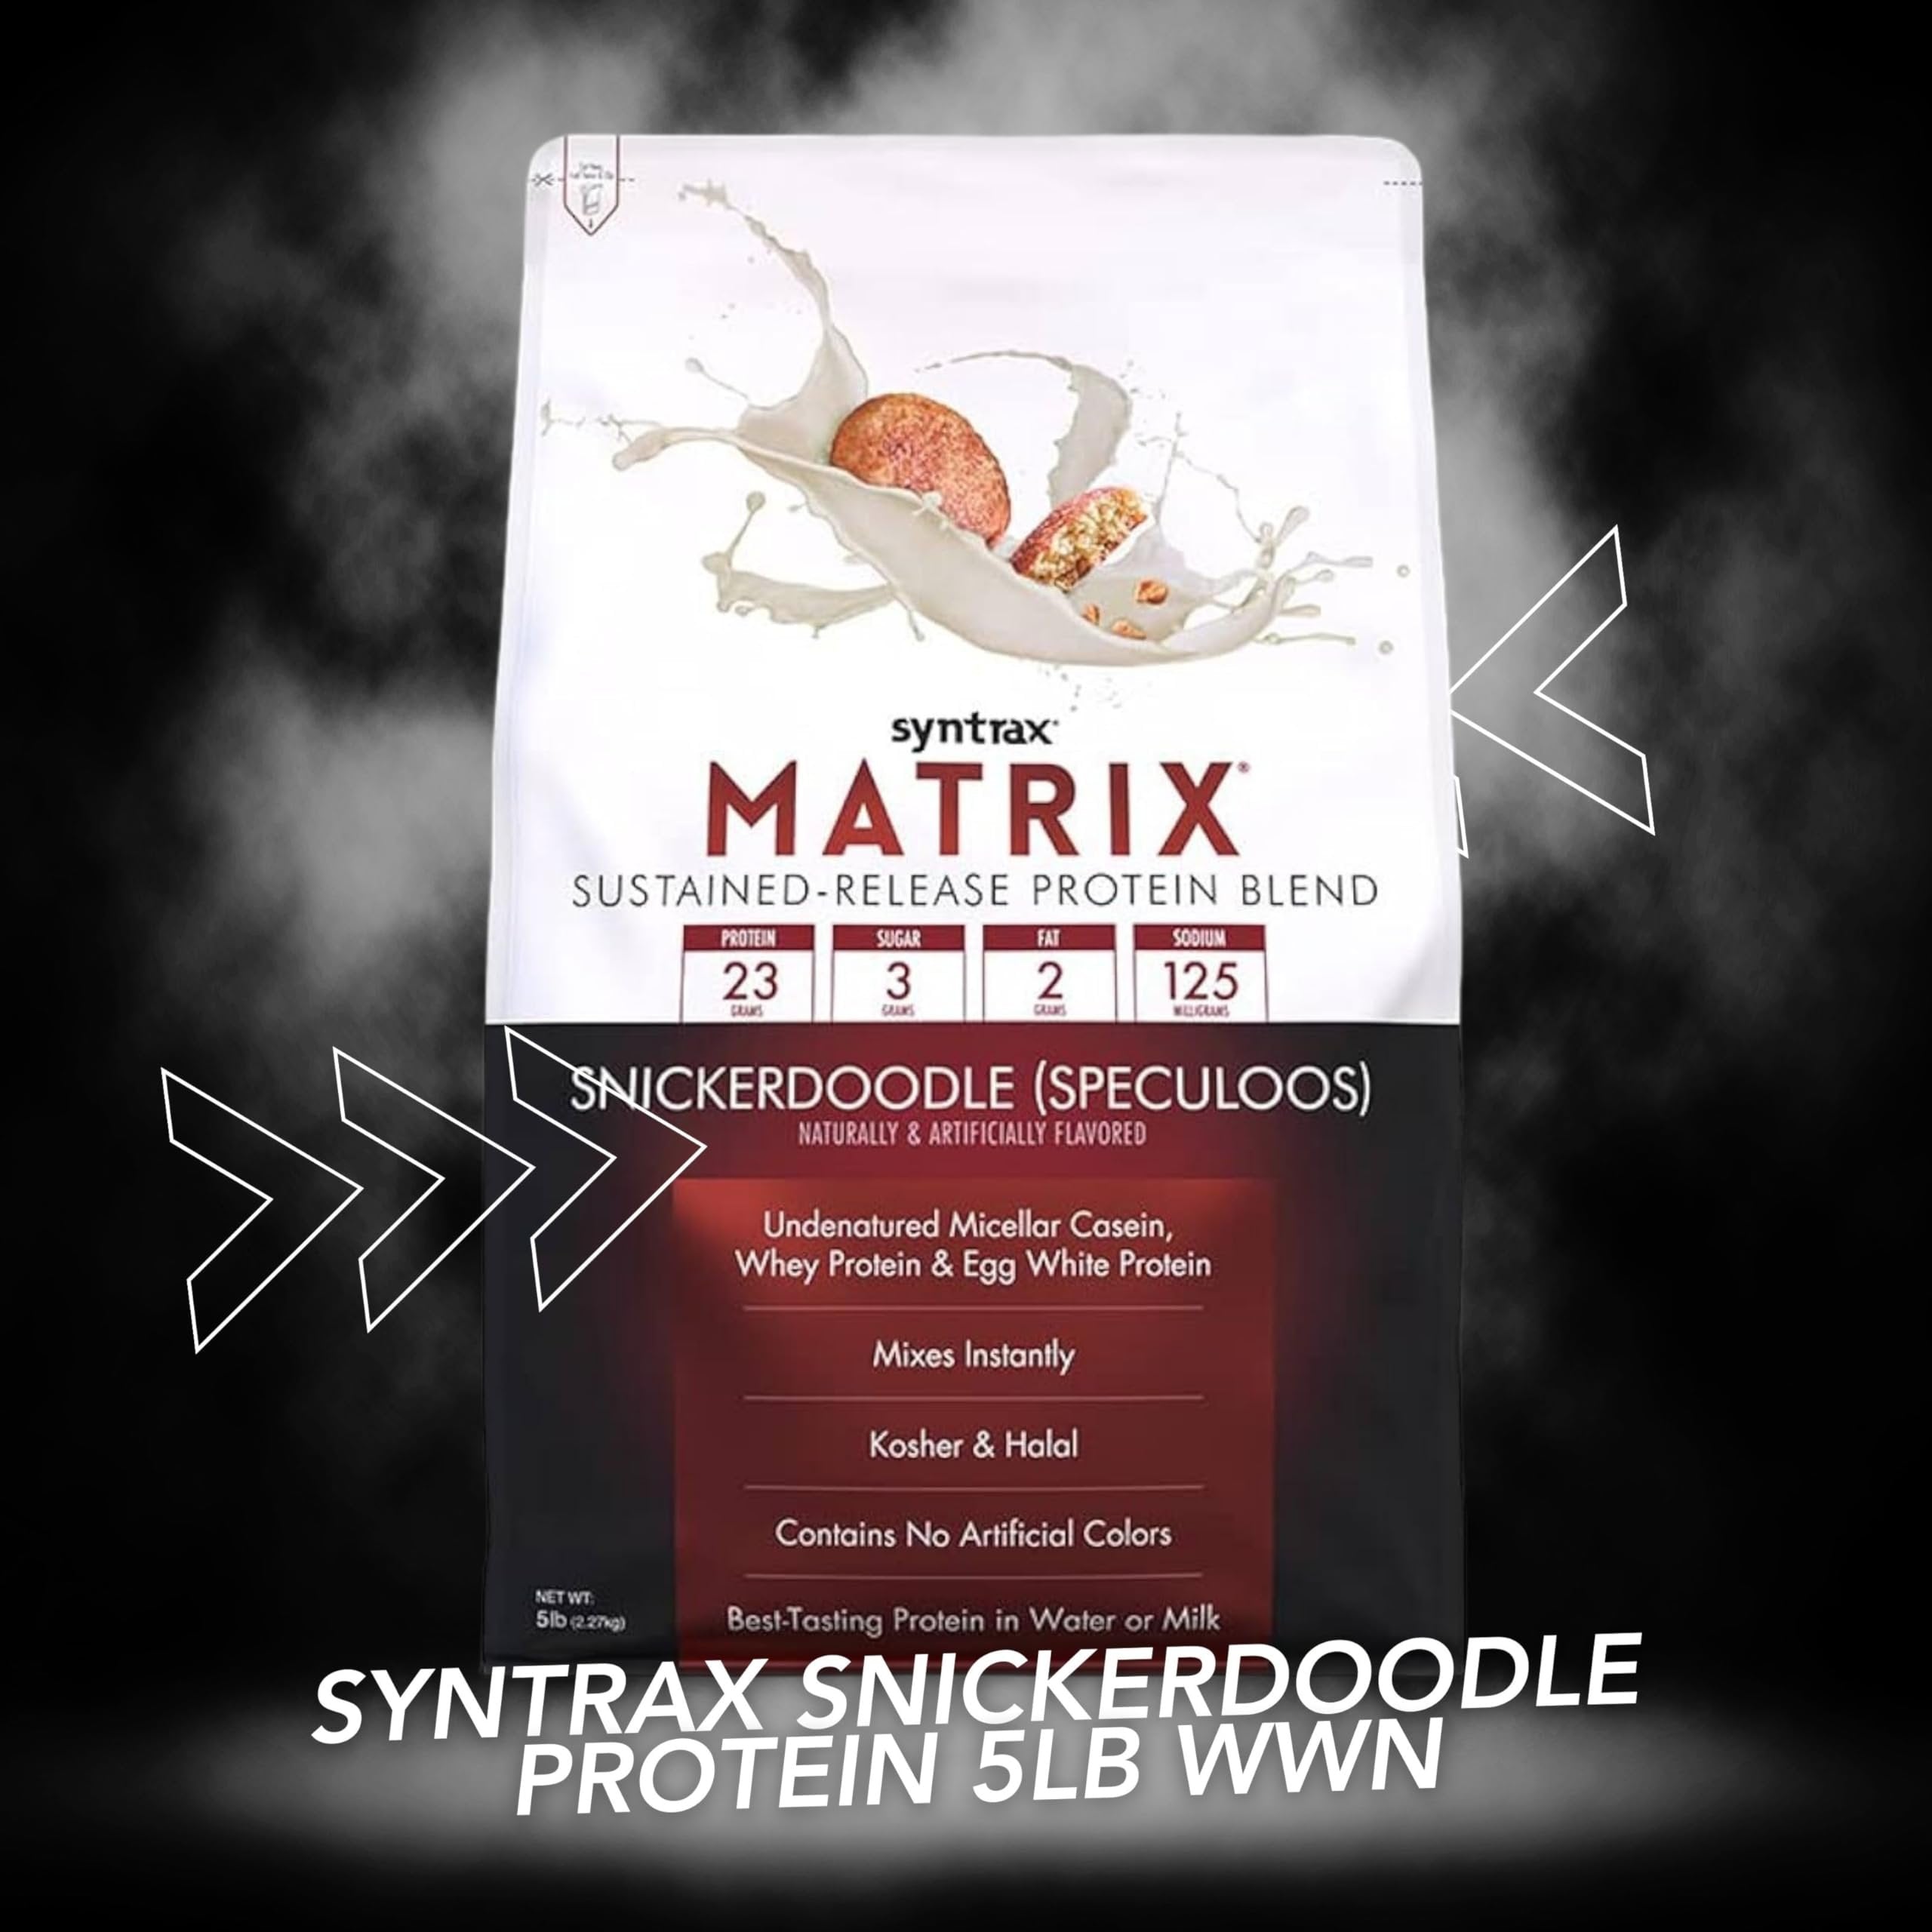 Syntrax Bundle, 2 Items Matrix Protein Powder Sustained-Release Casein Protein and Whey Protein Powder - Instant Mix Snickerdoodle Protein Powder Flavor, 5lbs with Worldwide Nutrition Keychain